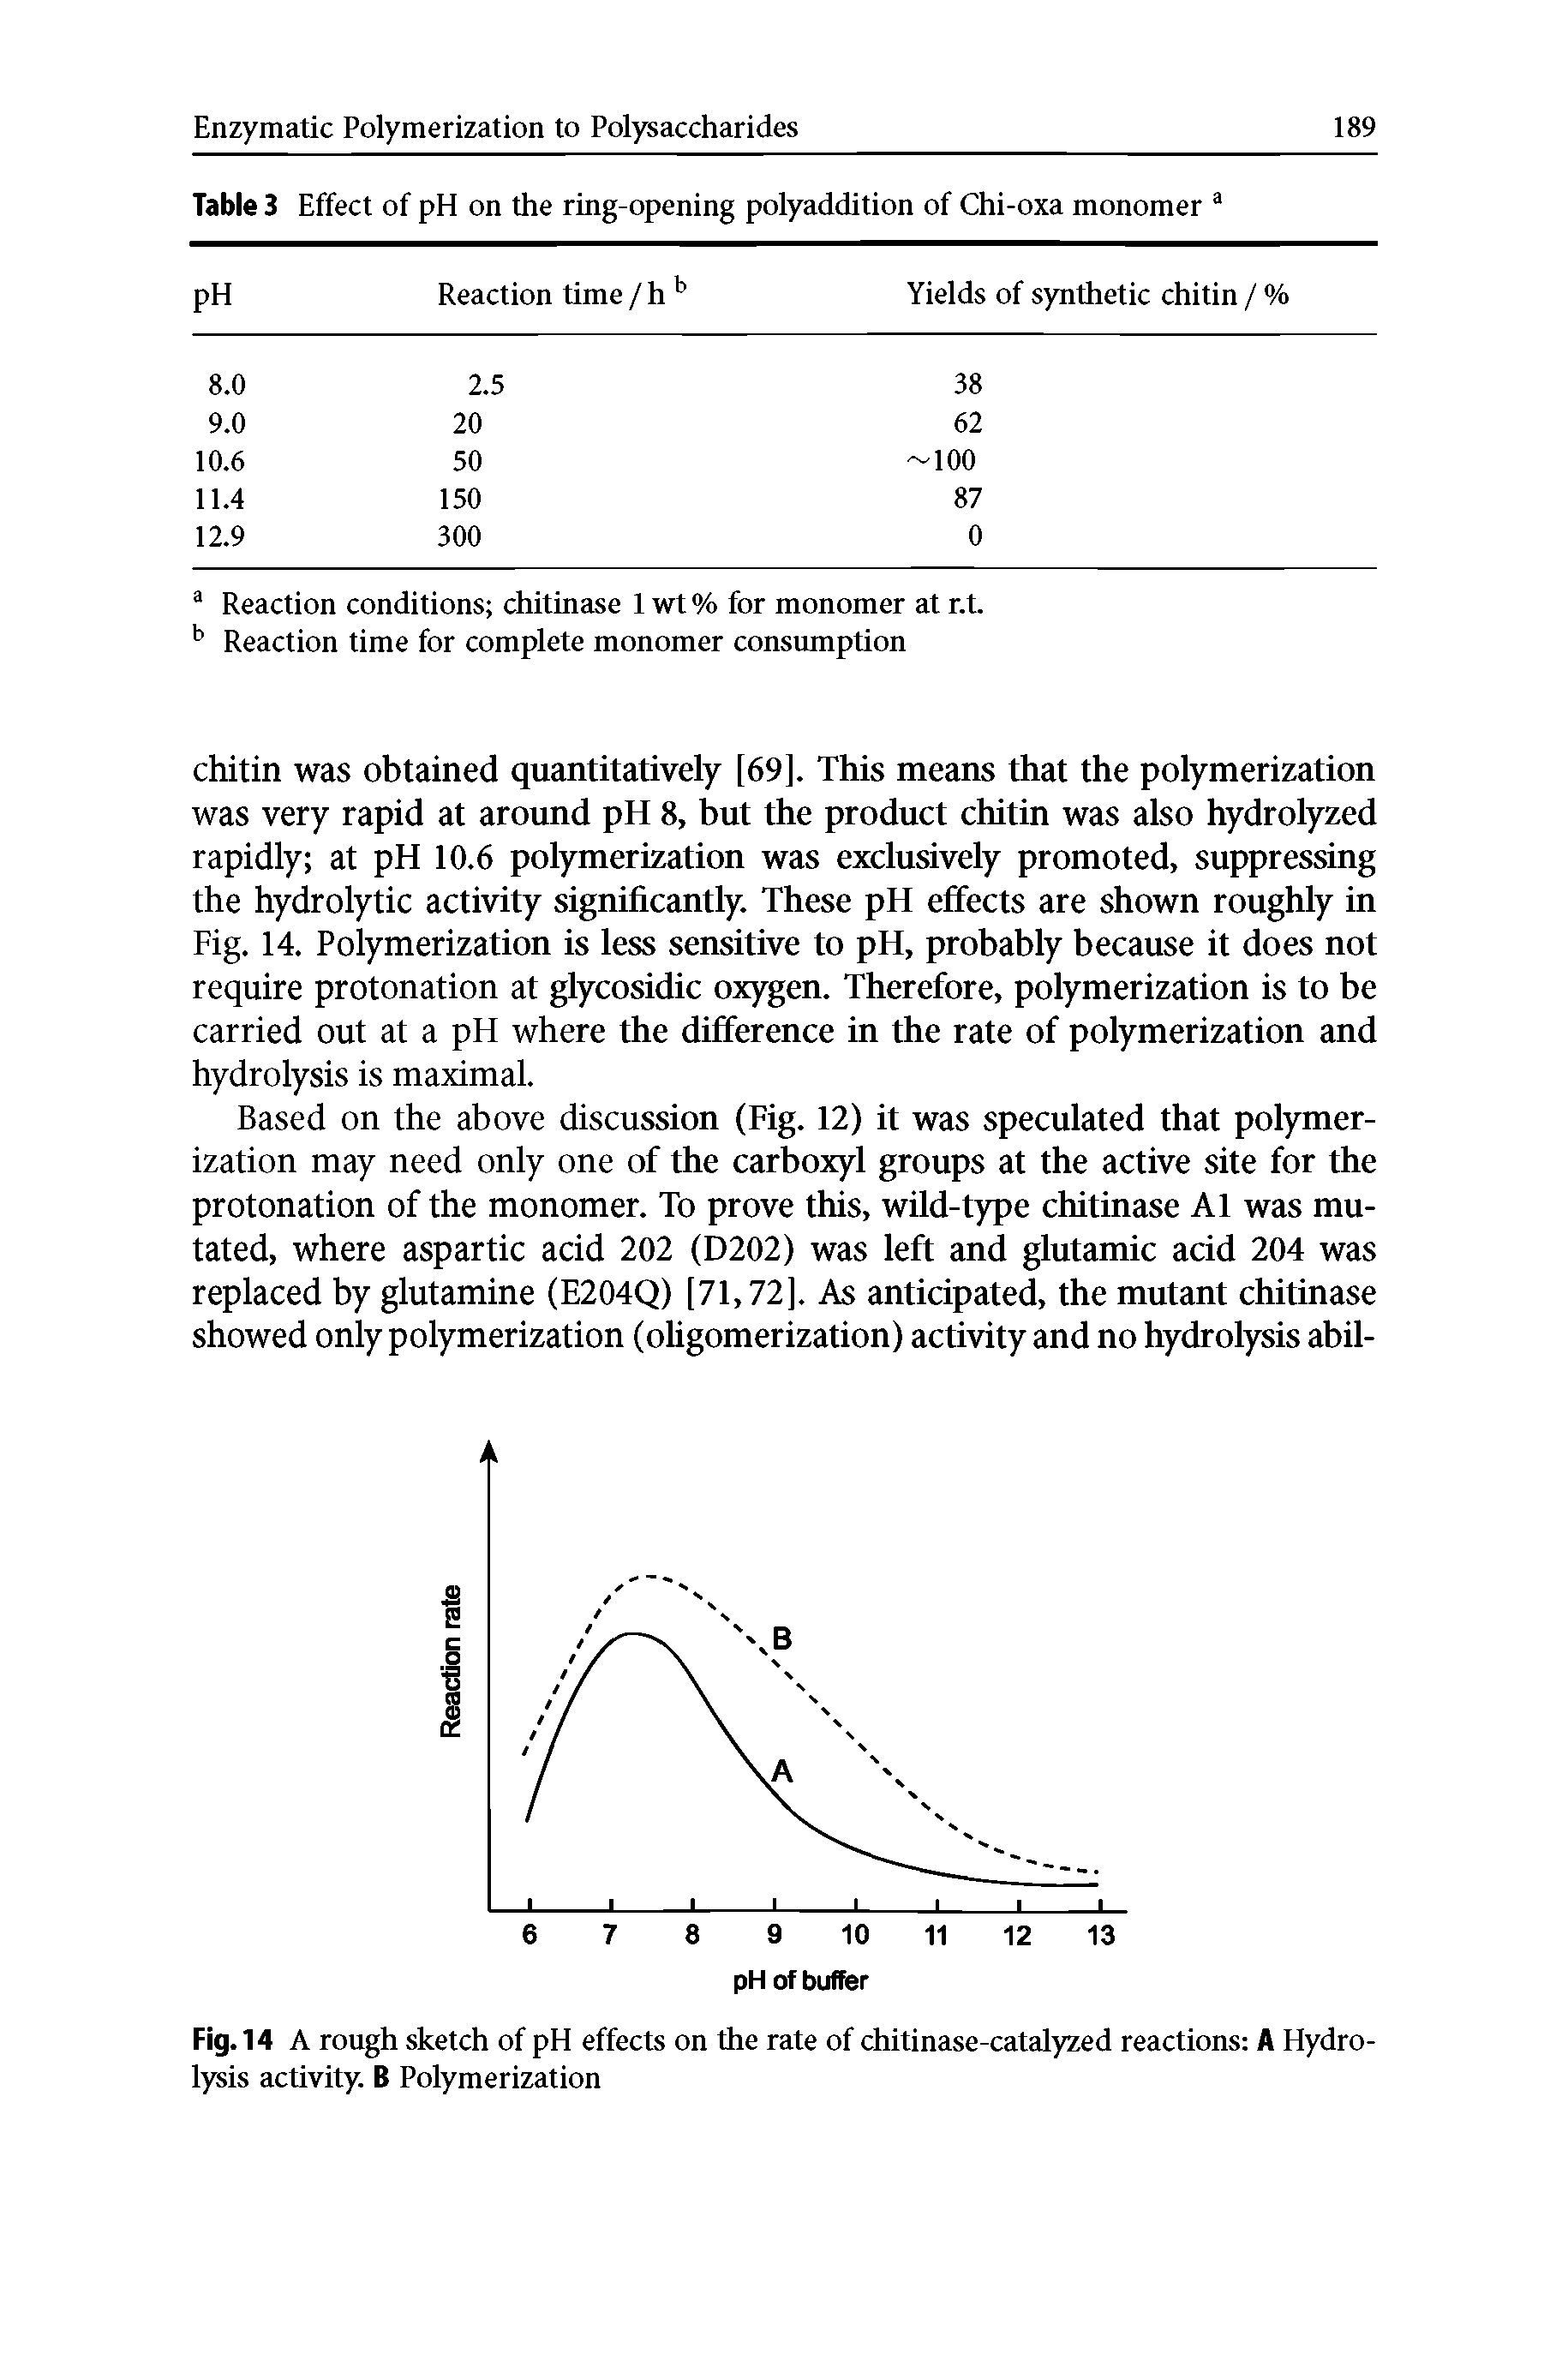 Table 3 Effect of pH on the ring-opening polyaddition of Chi-oxa monomer ...